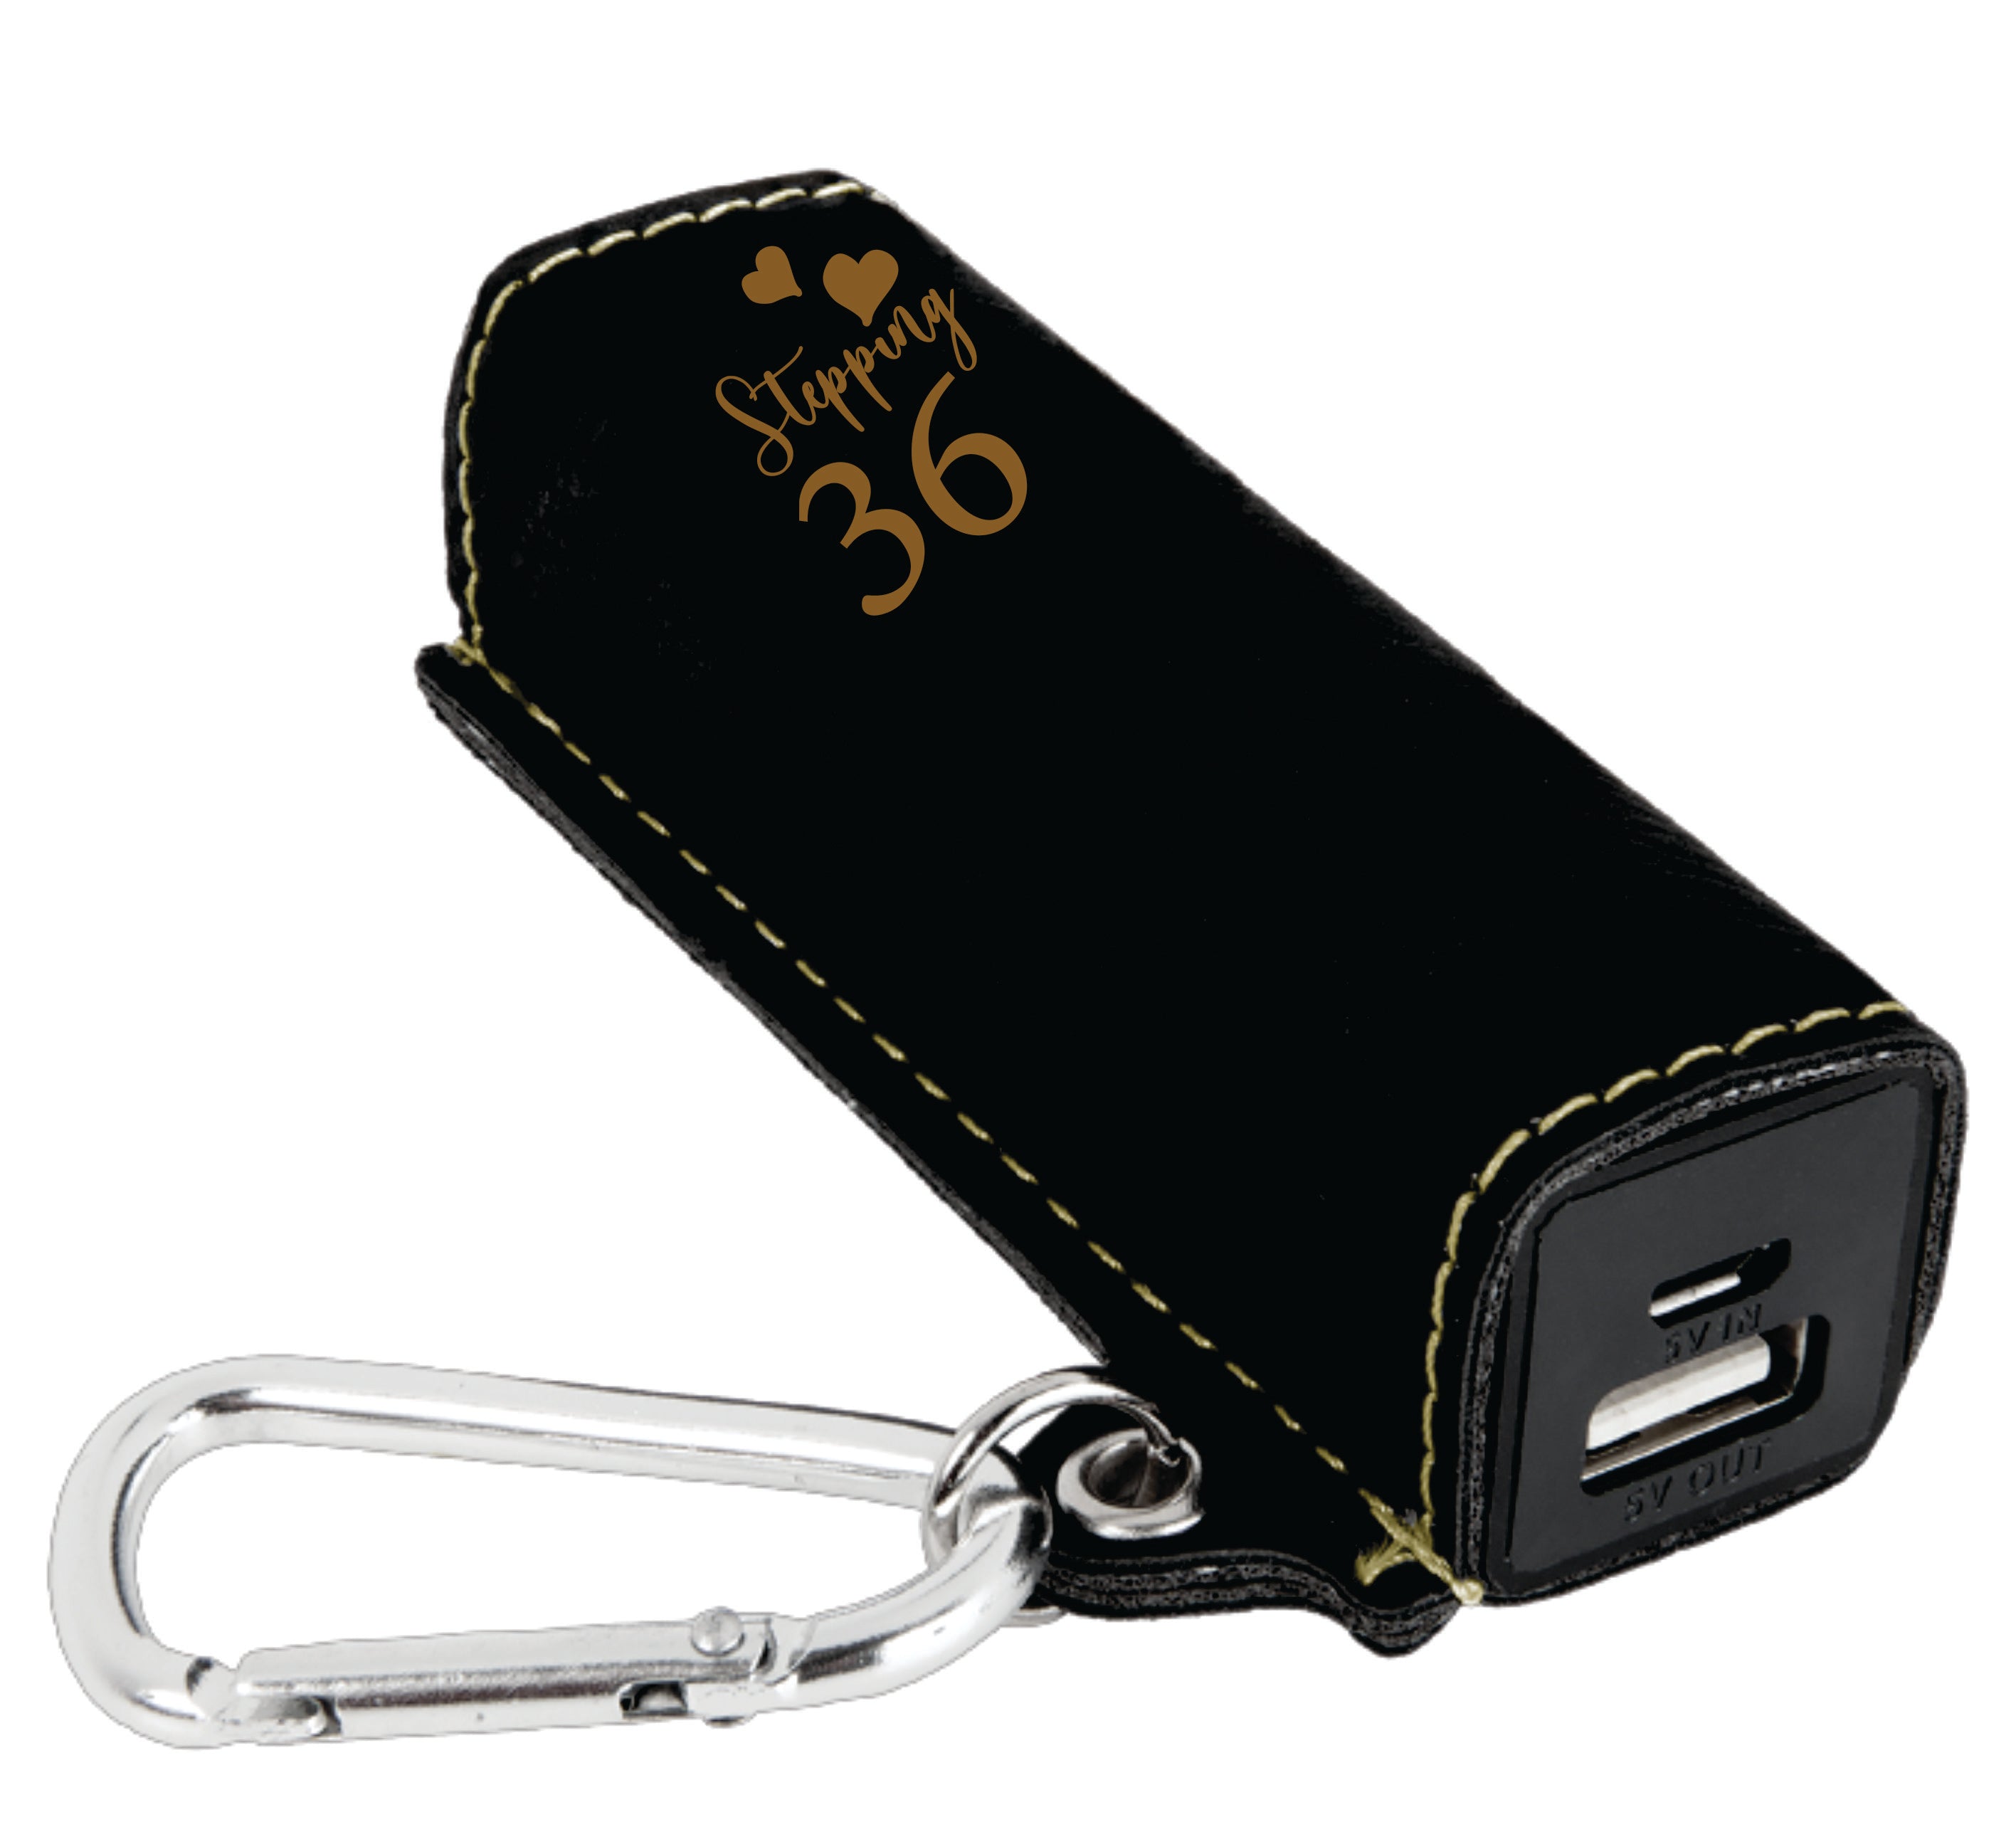 Black/Gold Laserable Leatherette 2200 mAh Power Bank with USB Cord